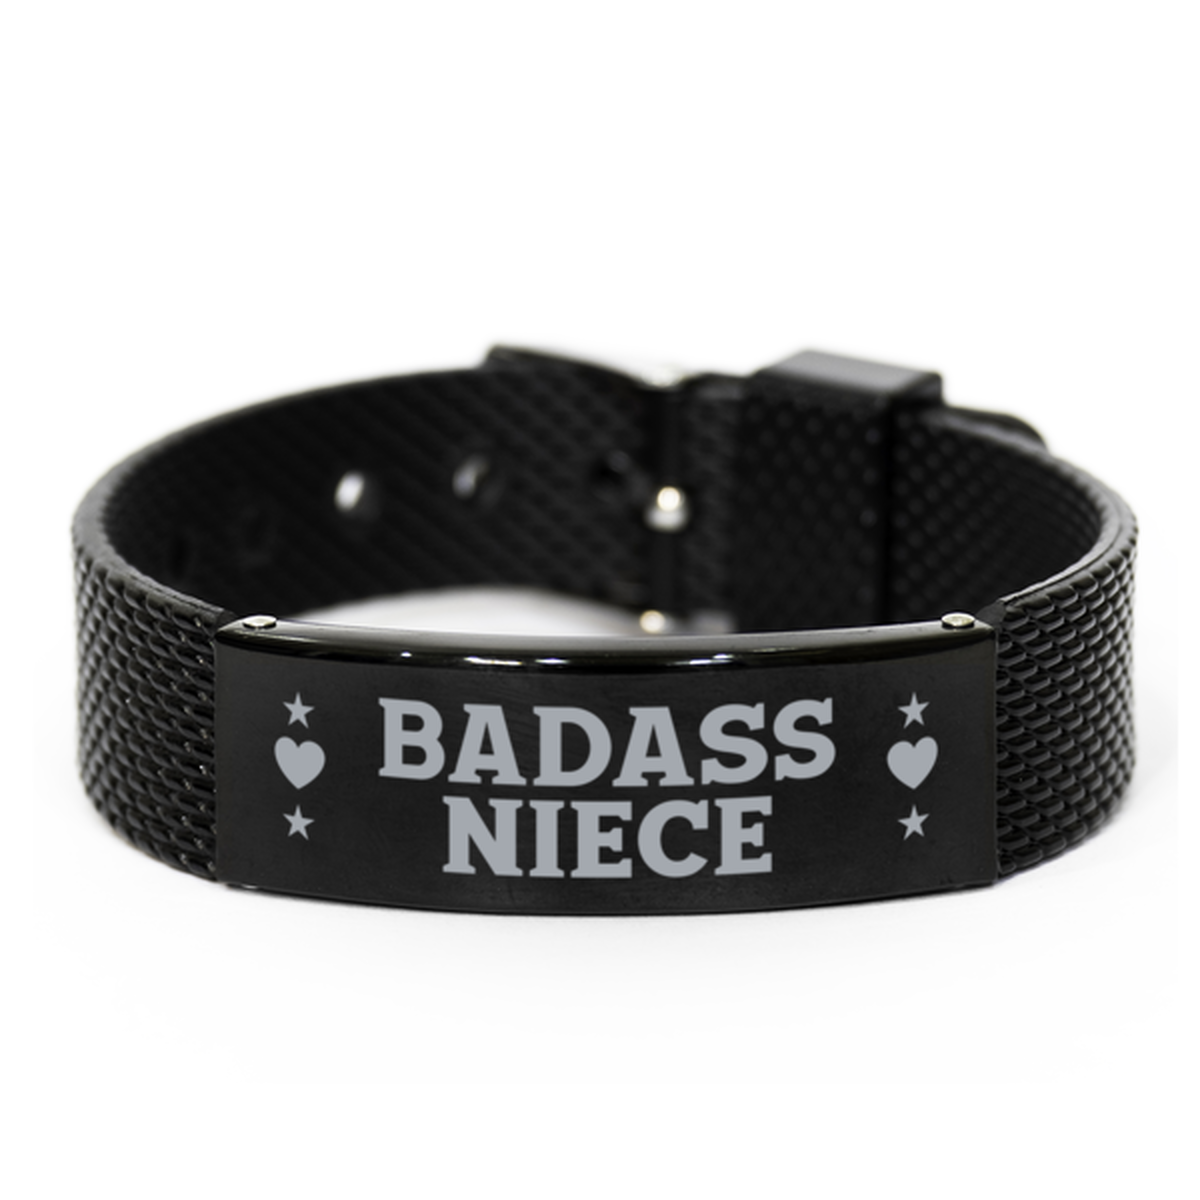 Niece Black Shark Mesh Bracelet, Badass Niece, Funny Family Gifts For Niece From Aunt Uncle